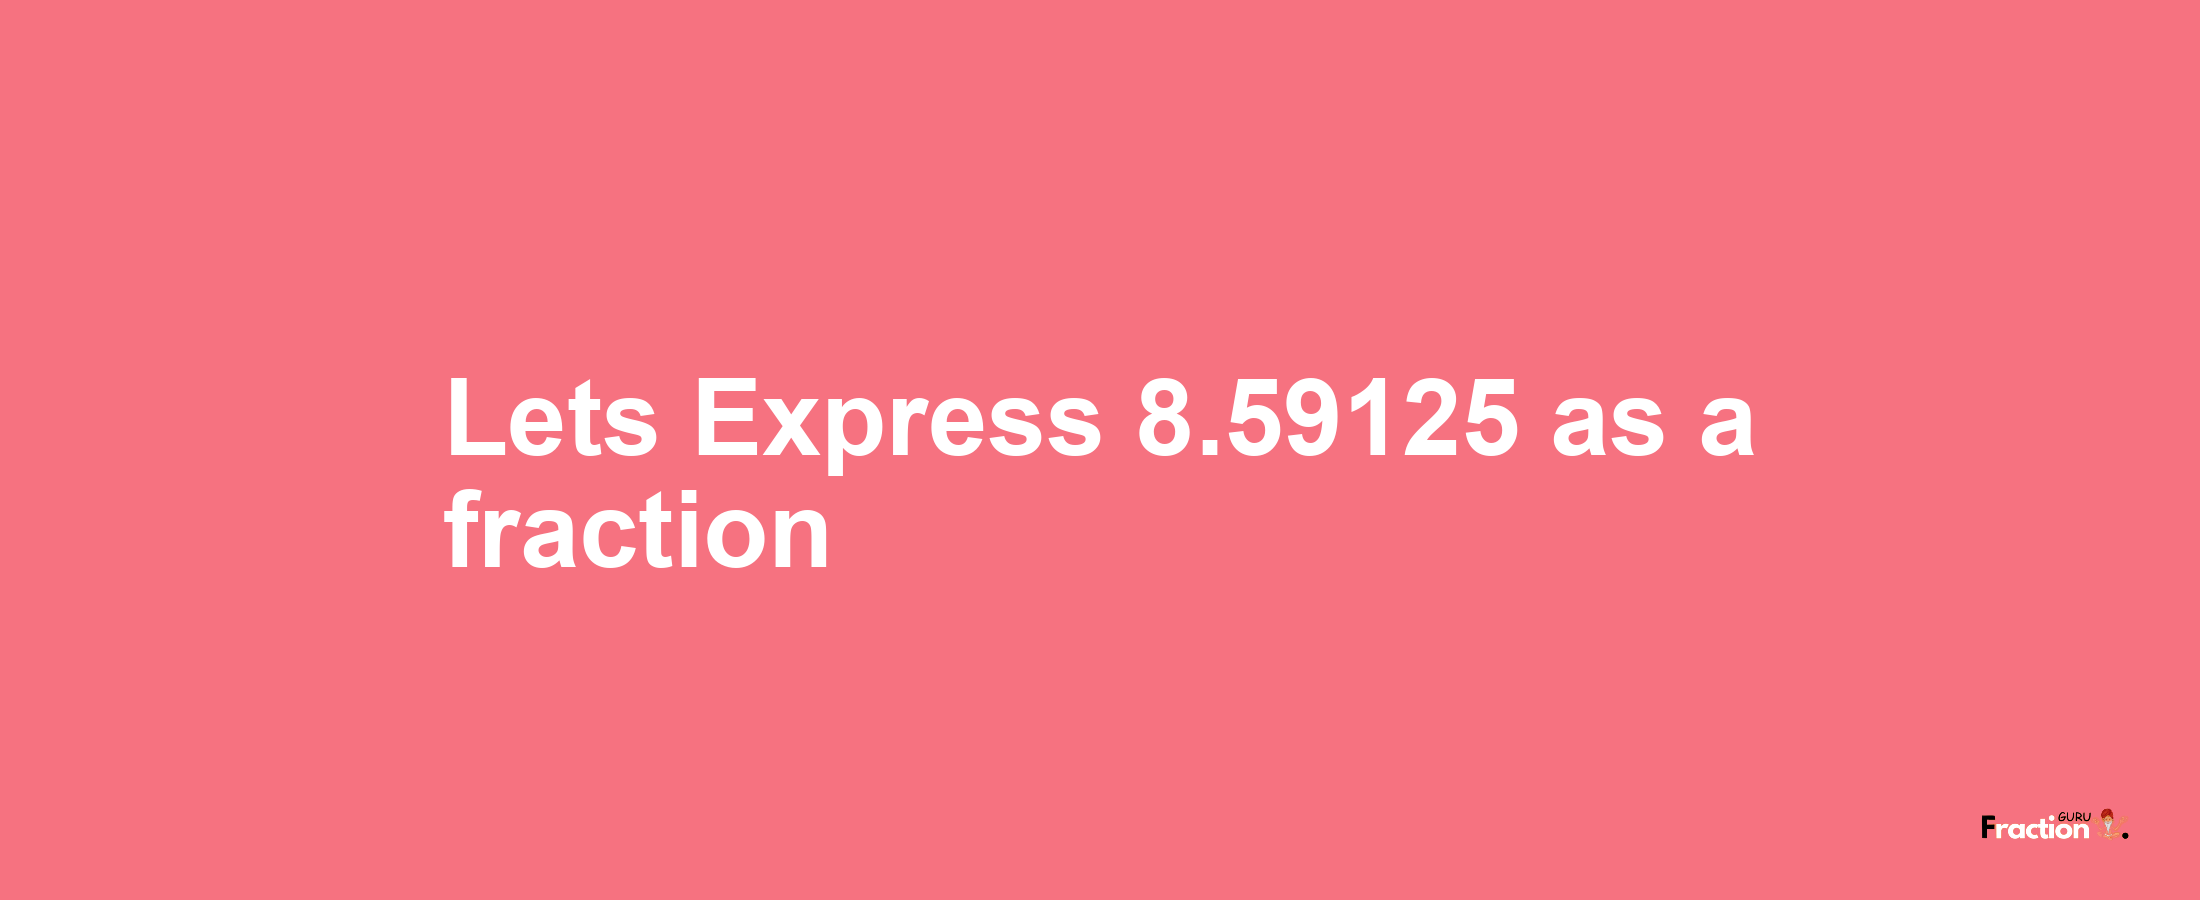 Lets Express 8.59125 as afraction